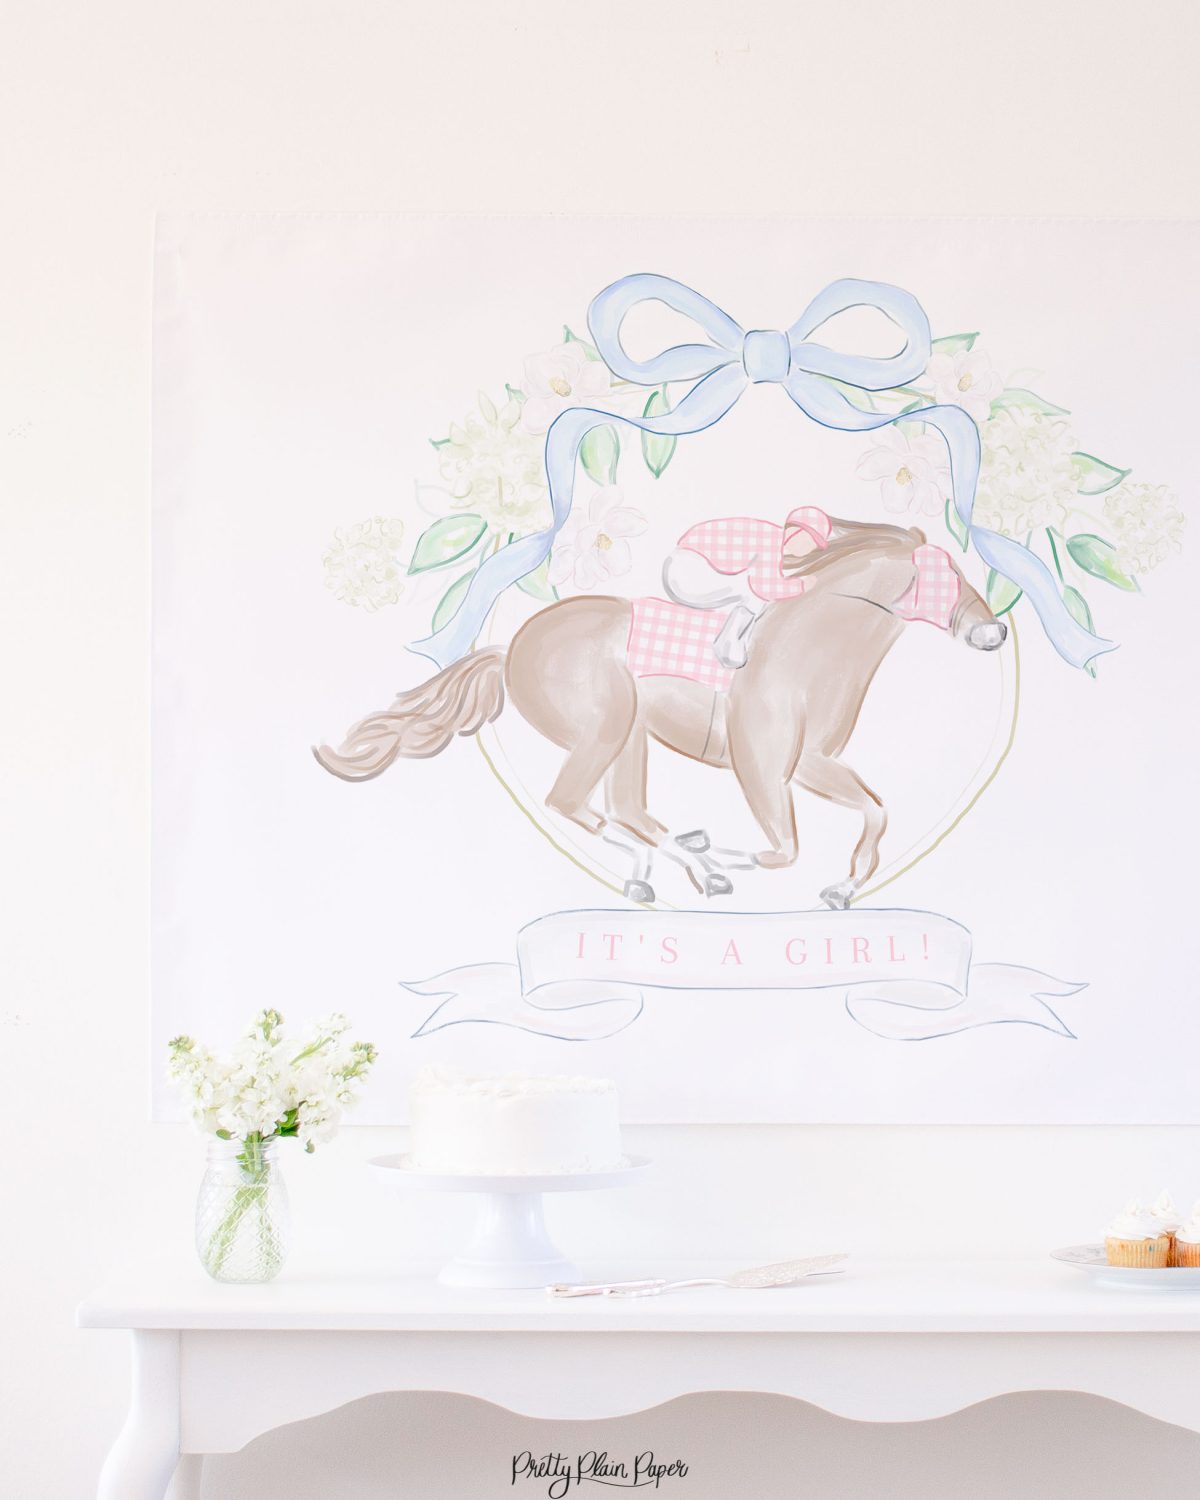 Pink Gingham Horse Racing Crest Backdrop for a Horse Racing Theme Baby Shower, Birthday, or Bridal Shower by Pretty Plain Paper